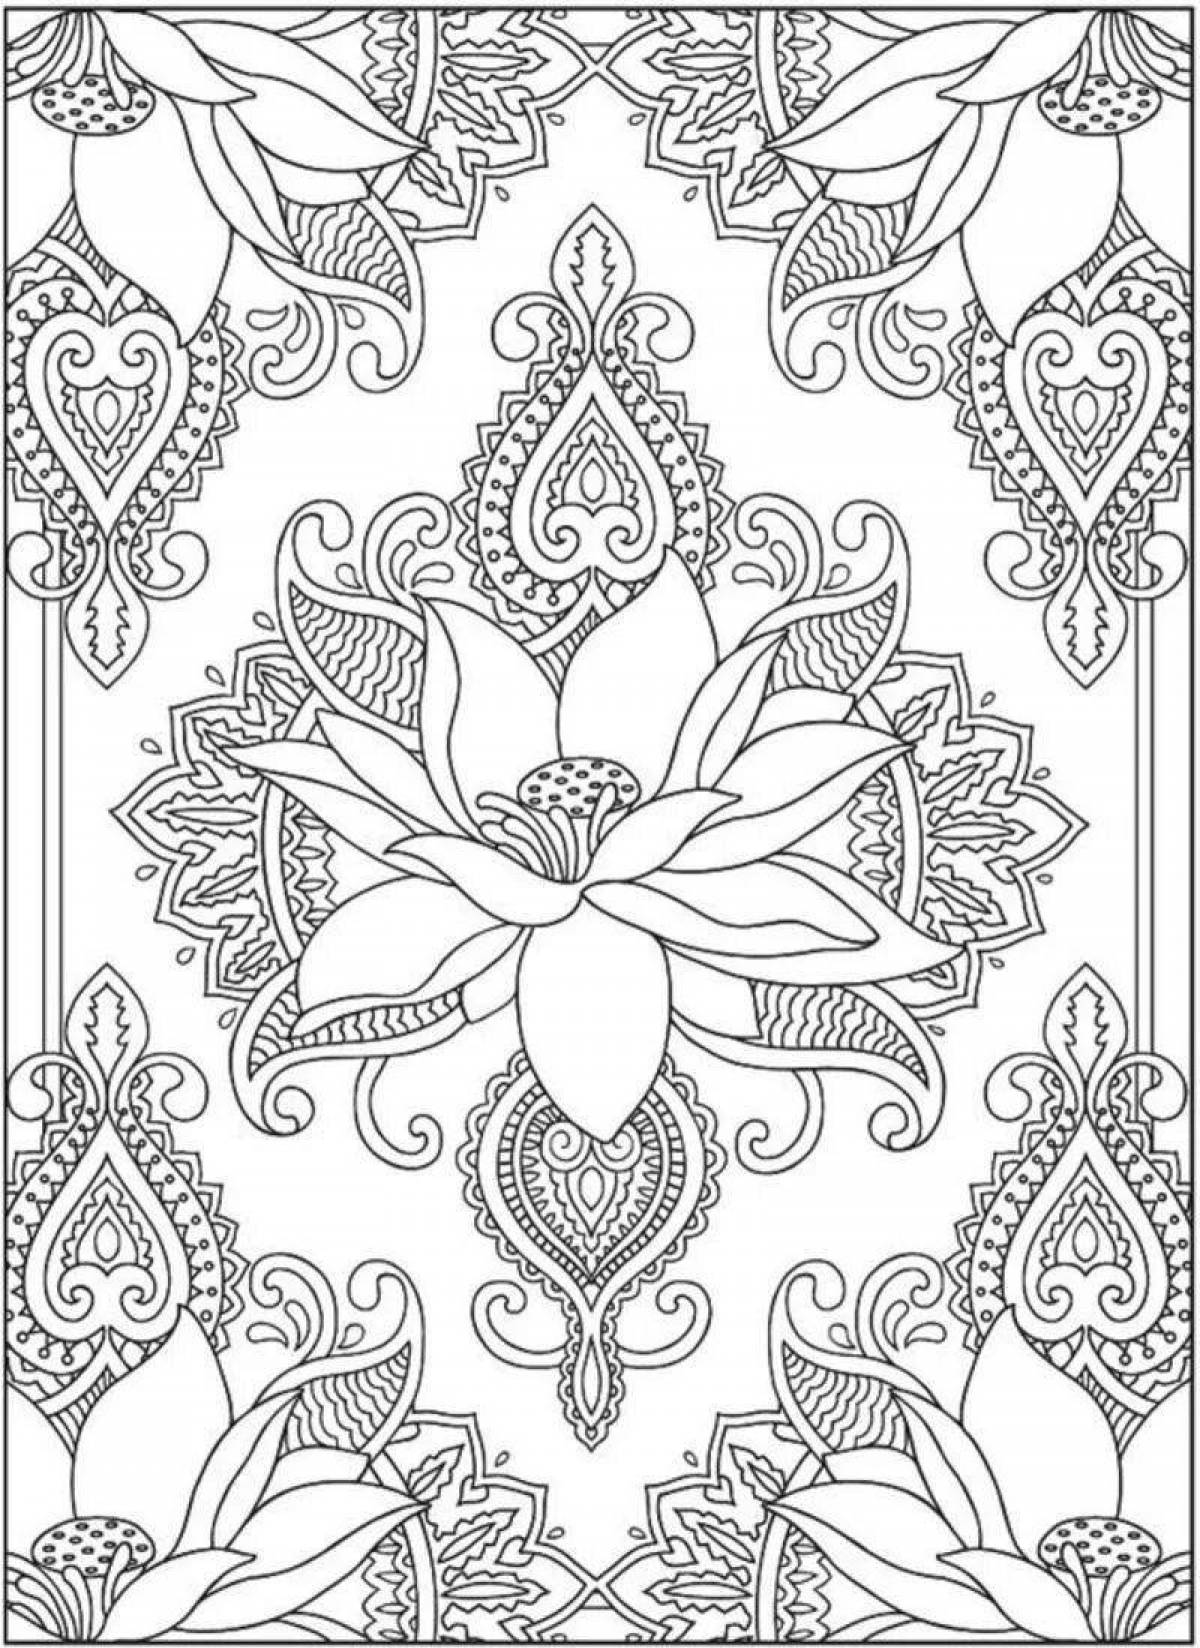 Easy coloring templates